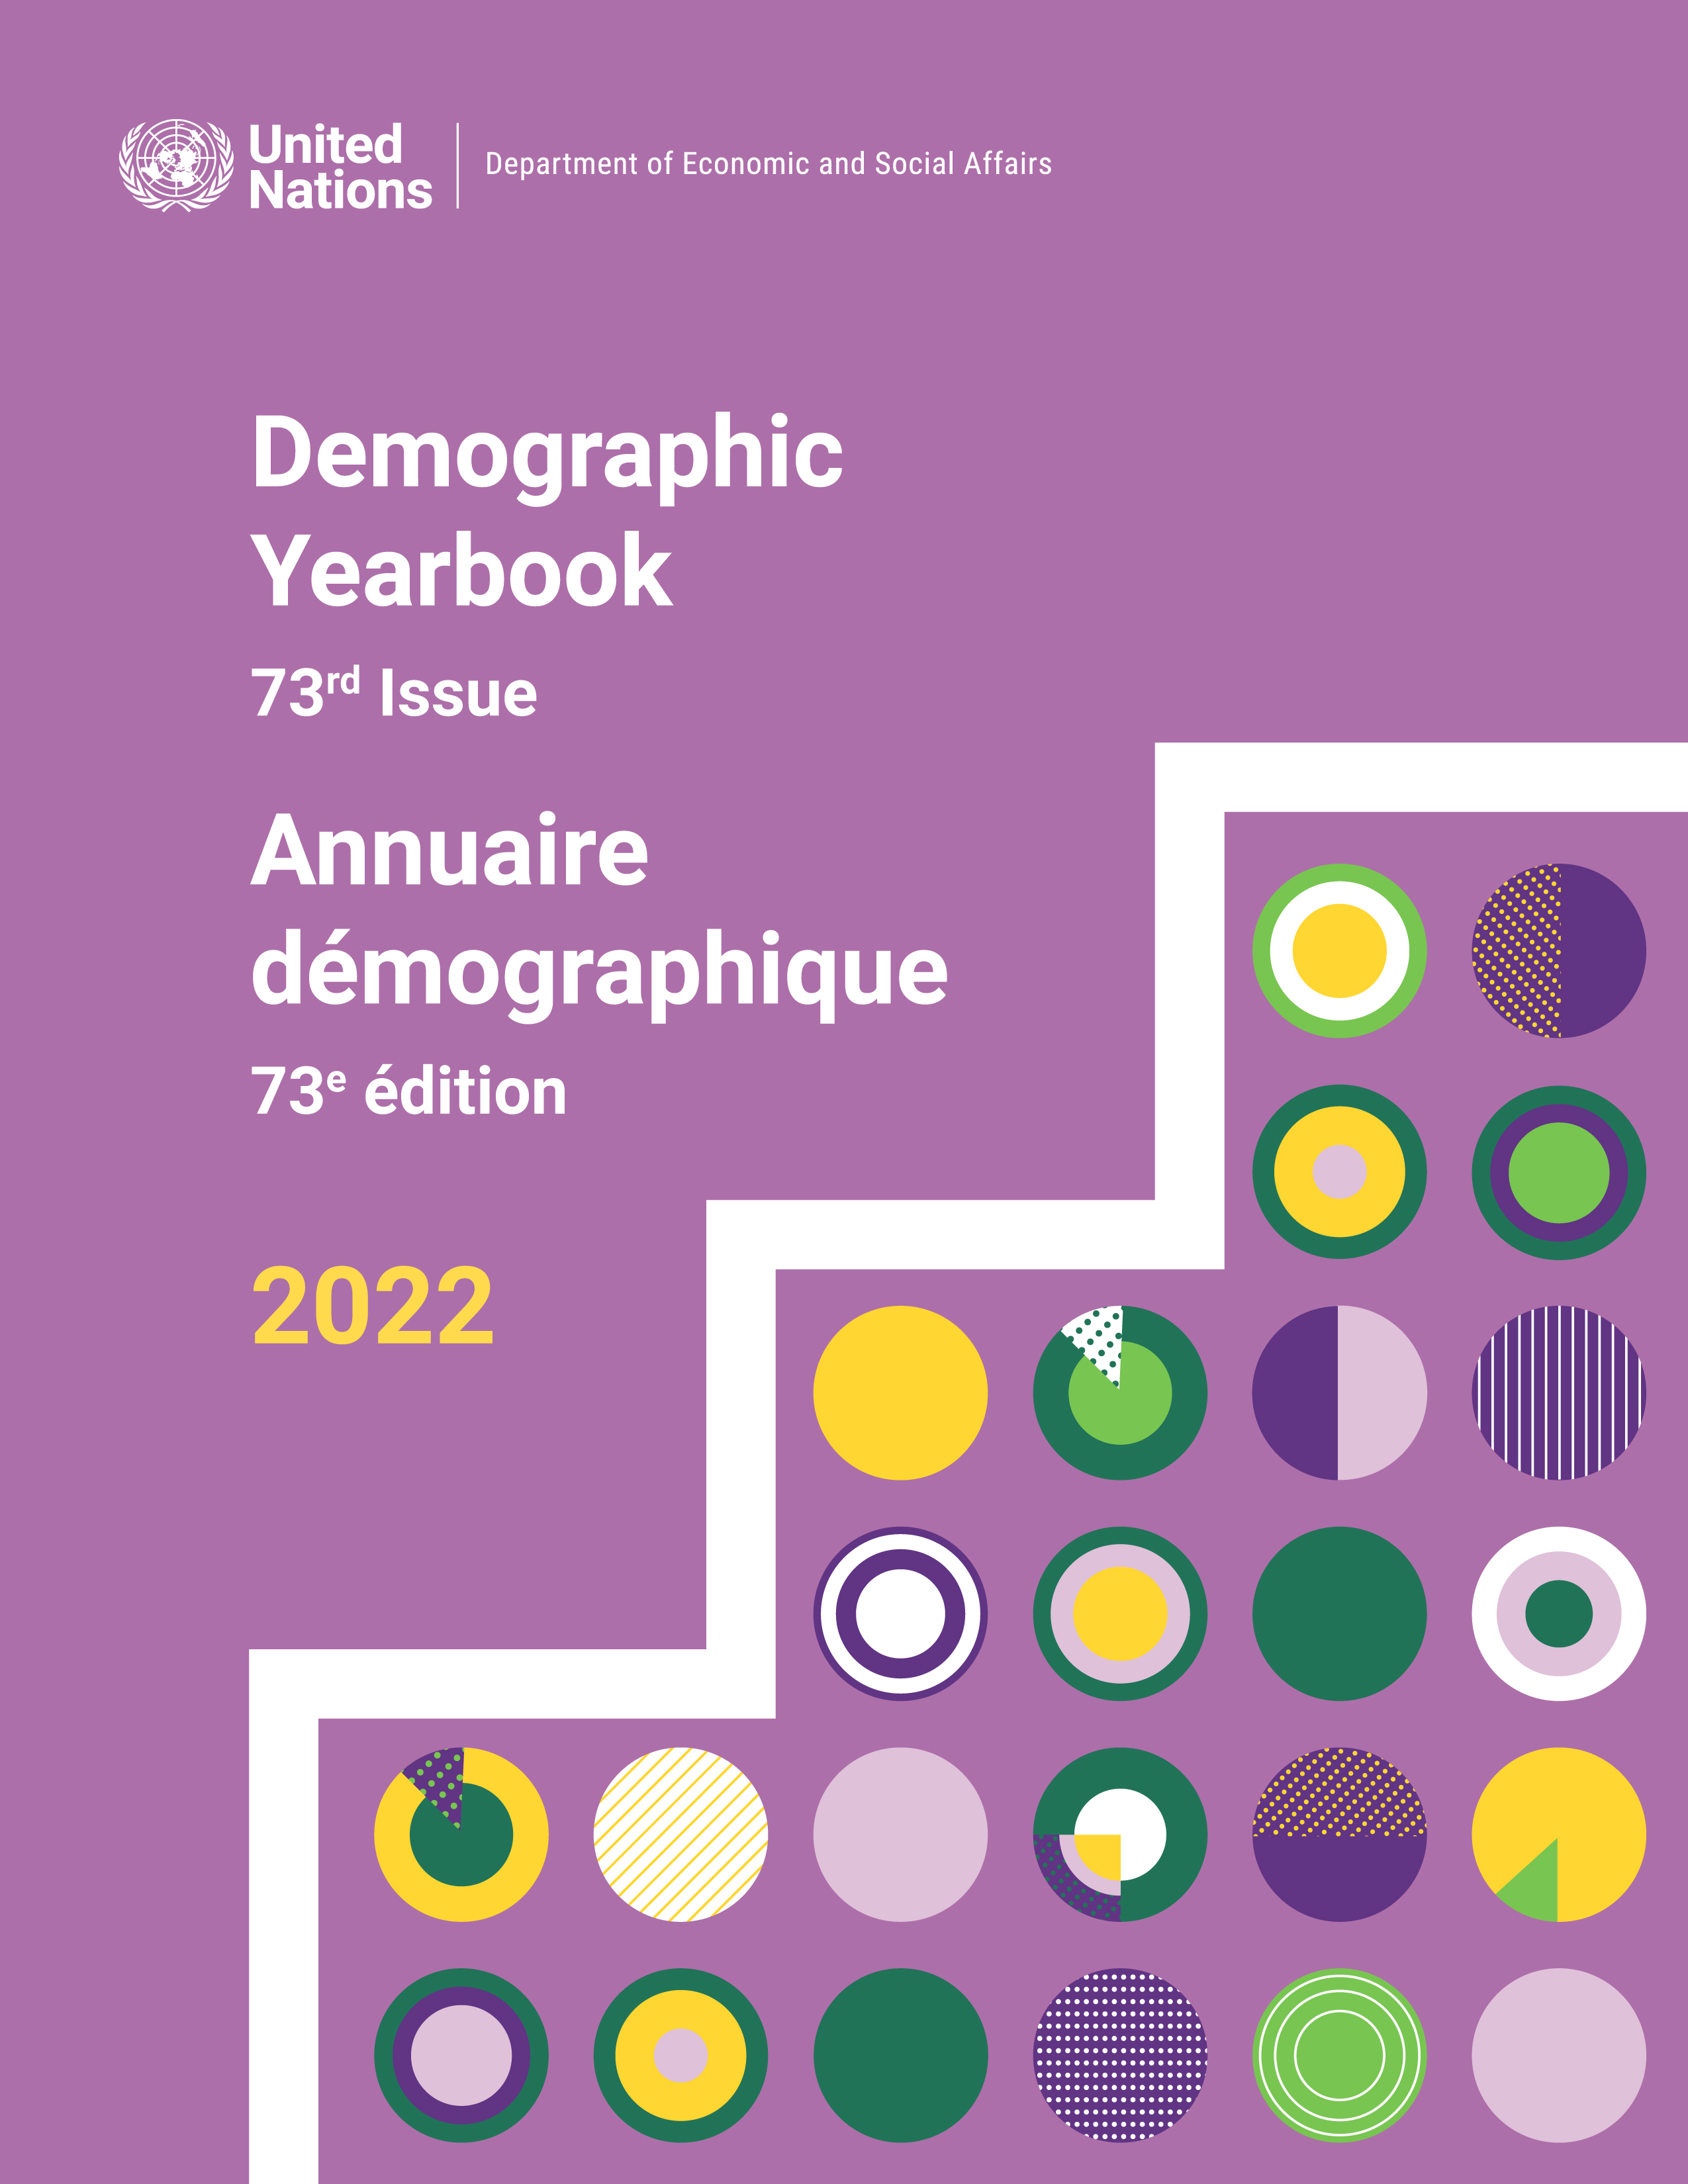 image of United Nations Demographic Yearbook 2022